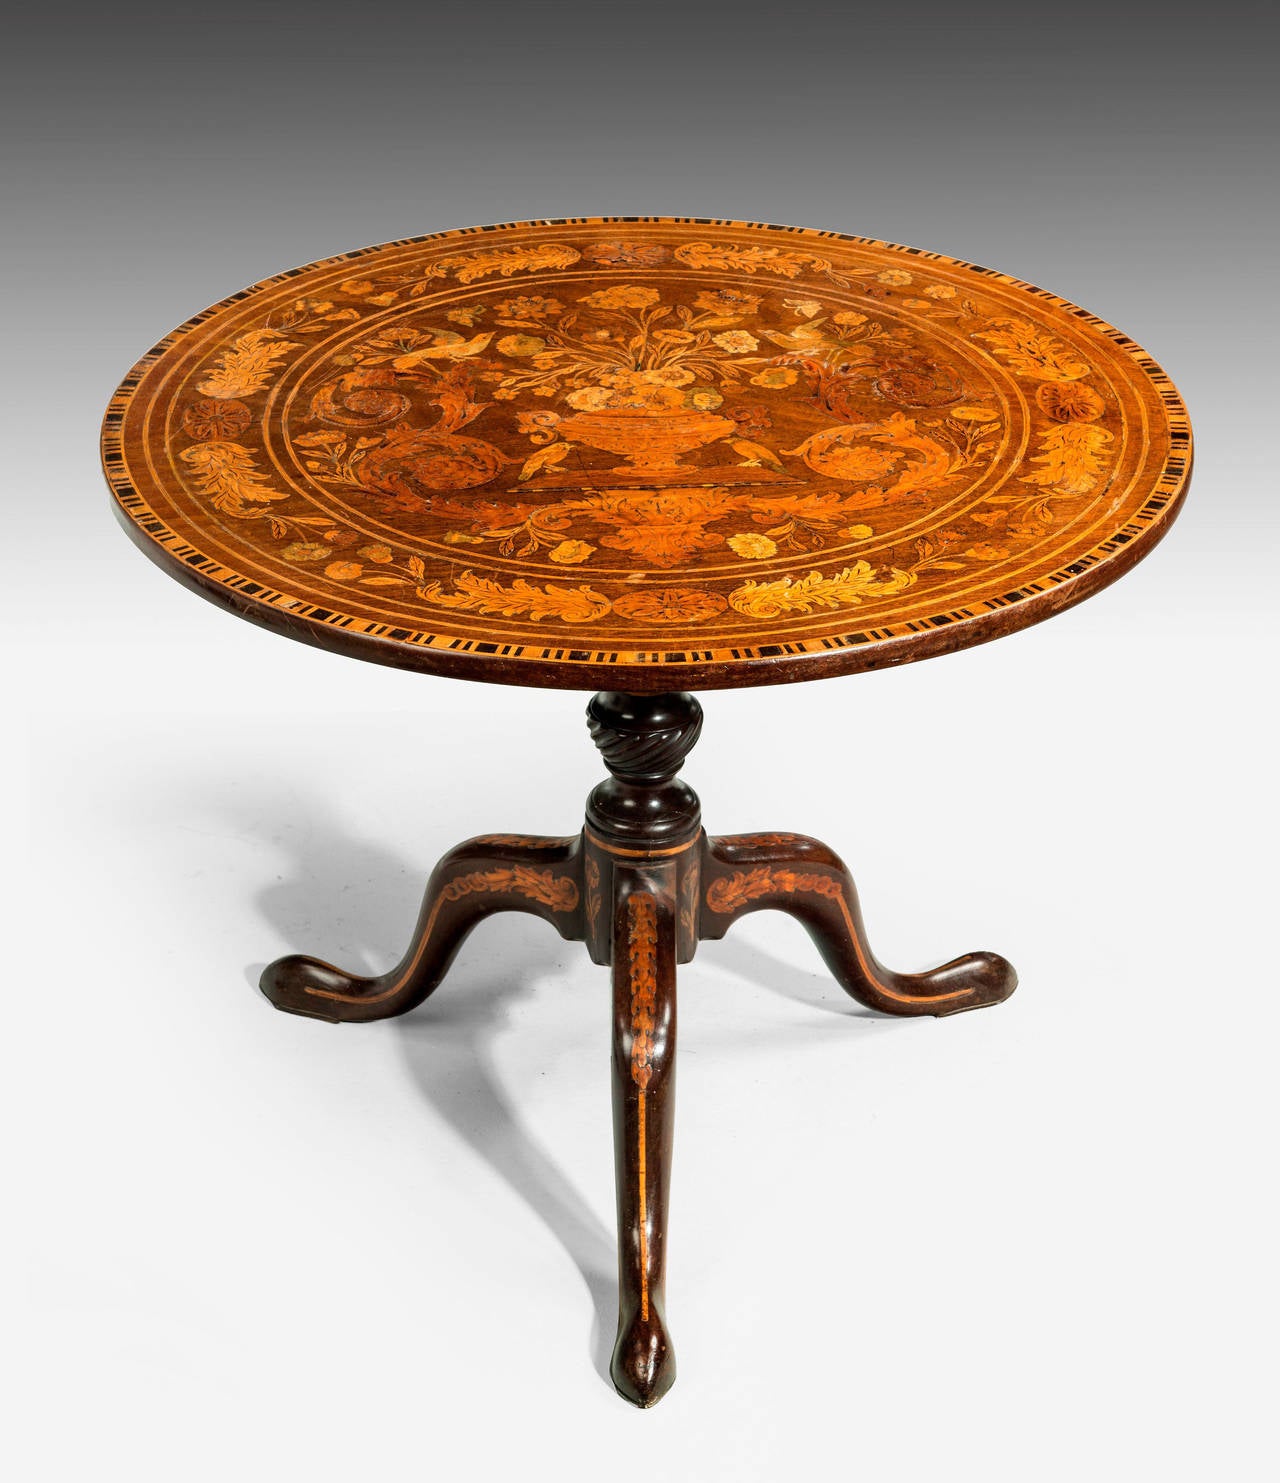 19th Century Dutch Marquetry Inlaid Tilt Table In Good Condition In Peterborough, Northamptonshire